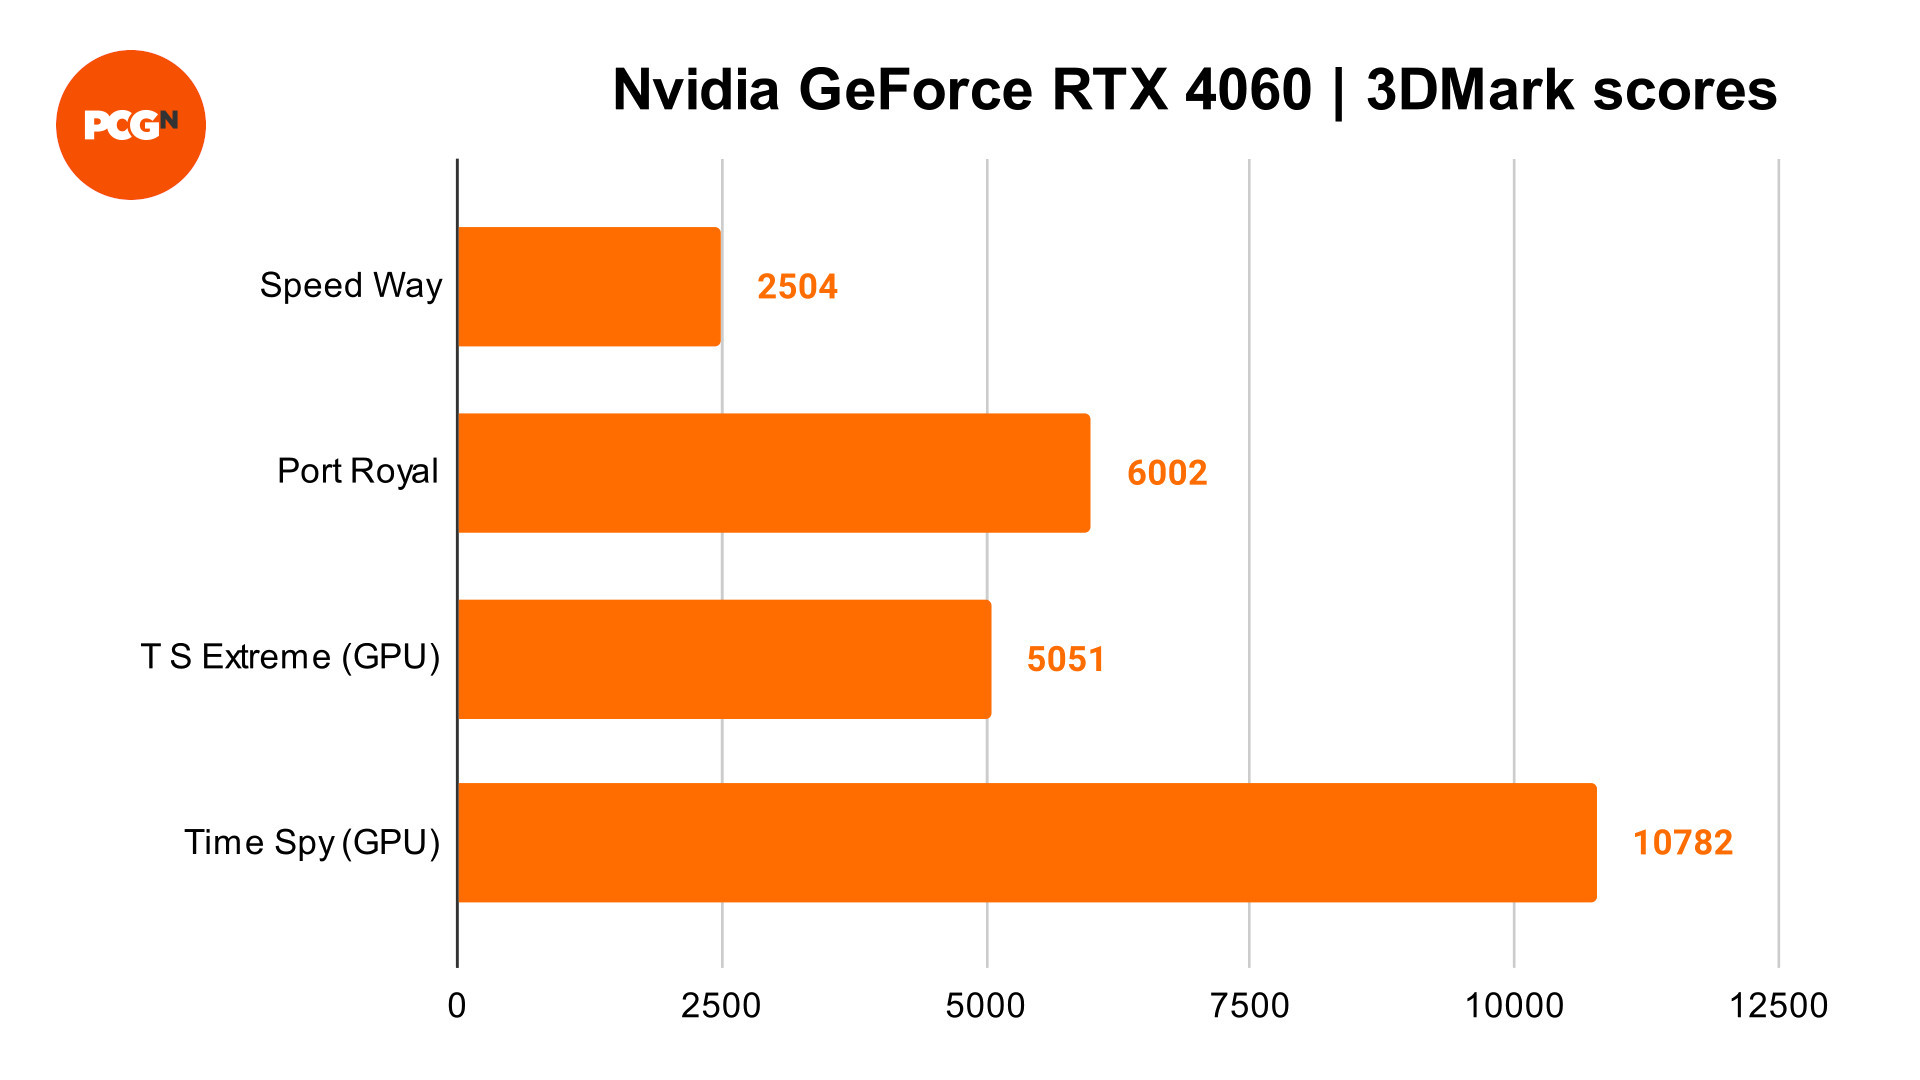 So no one is talking about this .Rtx 4050,4060 & 4070 Laptops